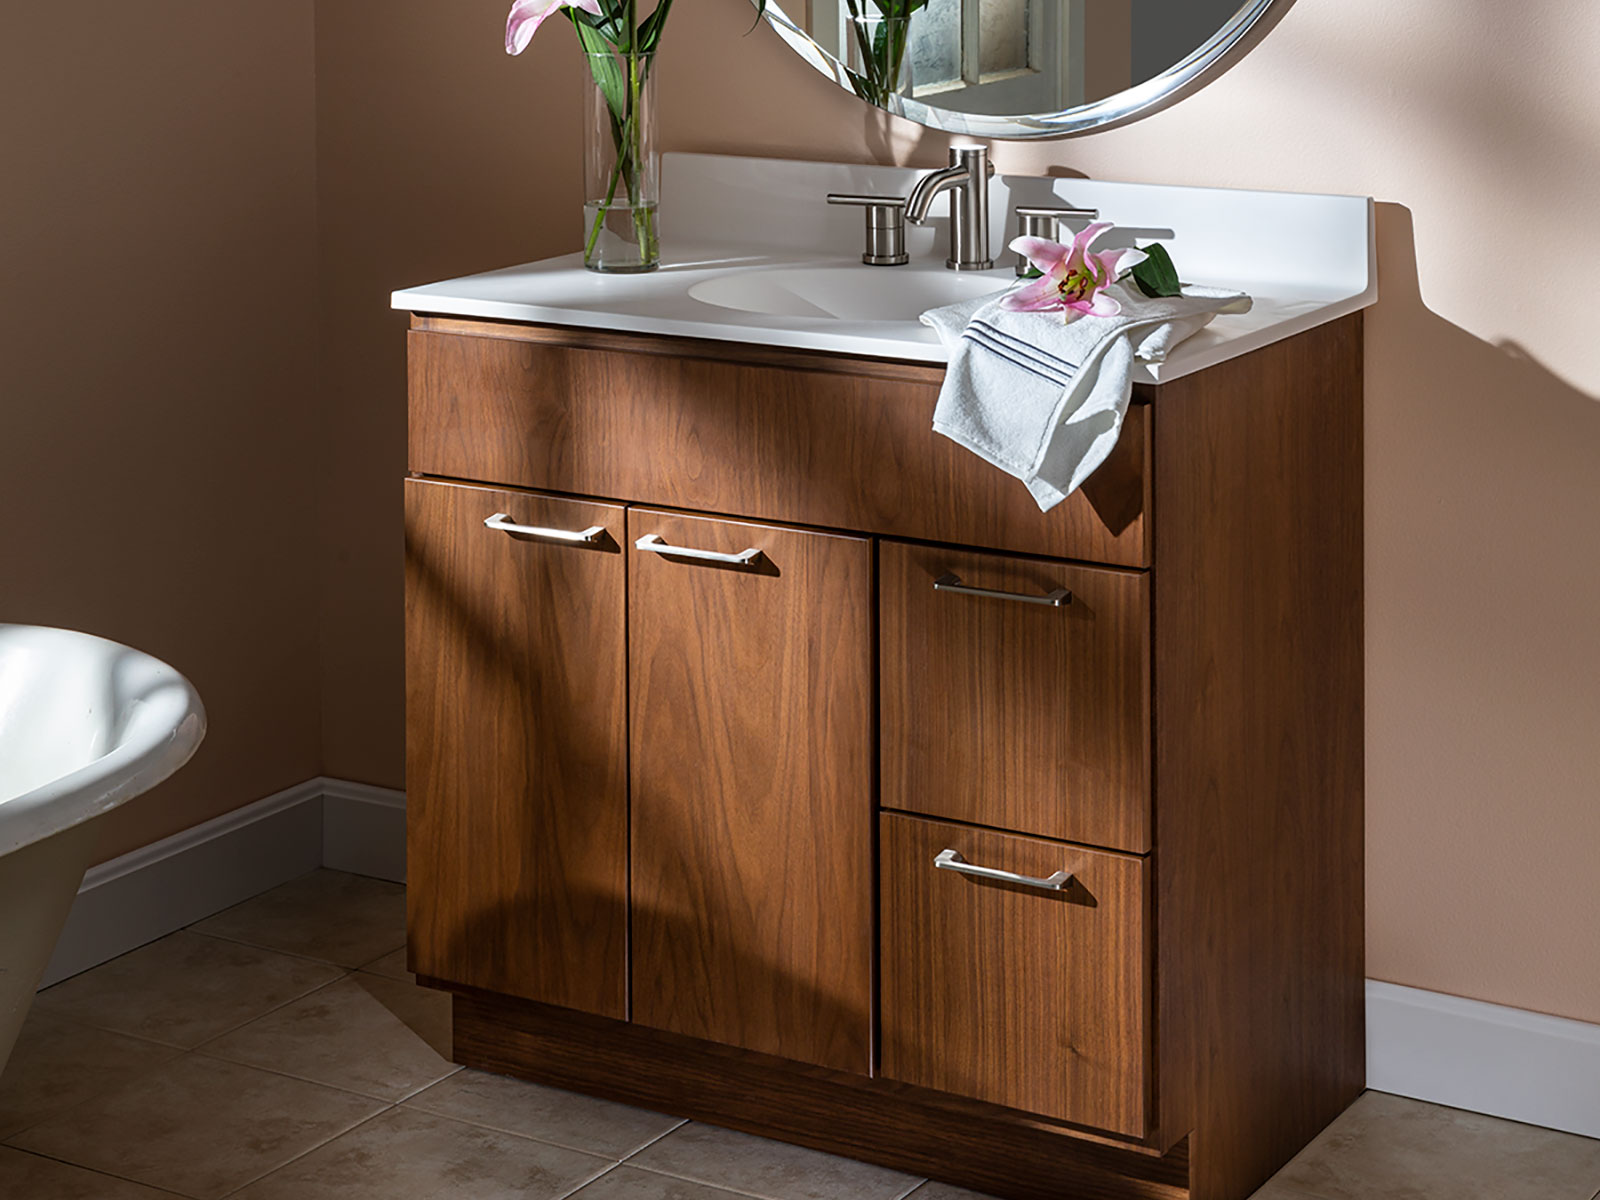 Bath Vanities And Cabinetry, Vanity Sink Base Cabinet Sizes